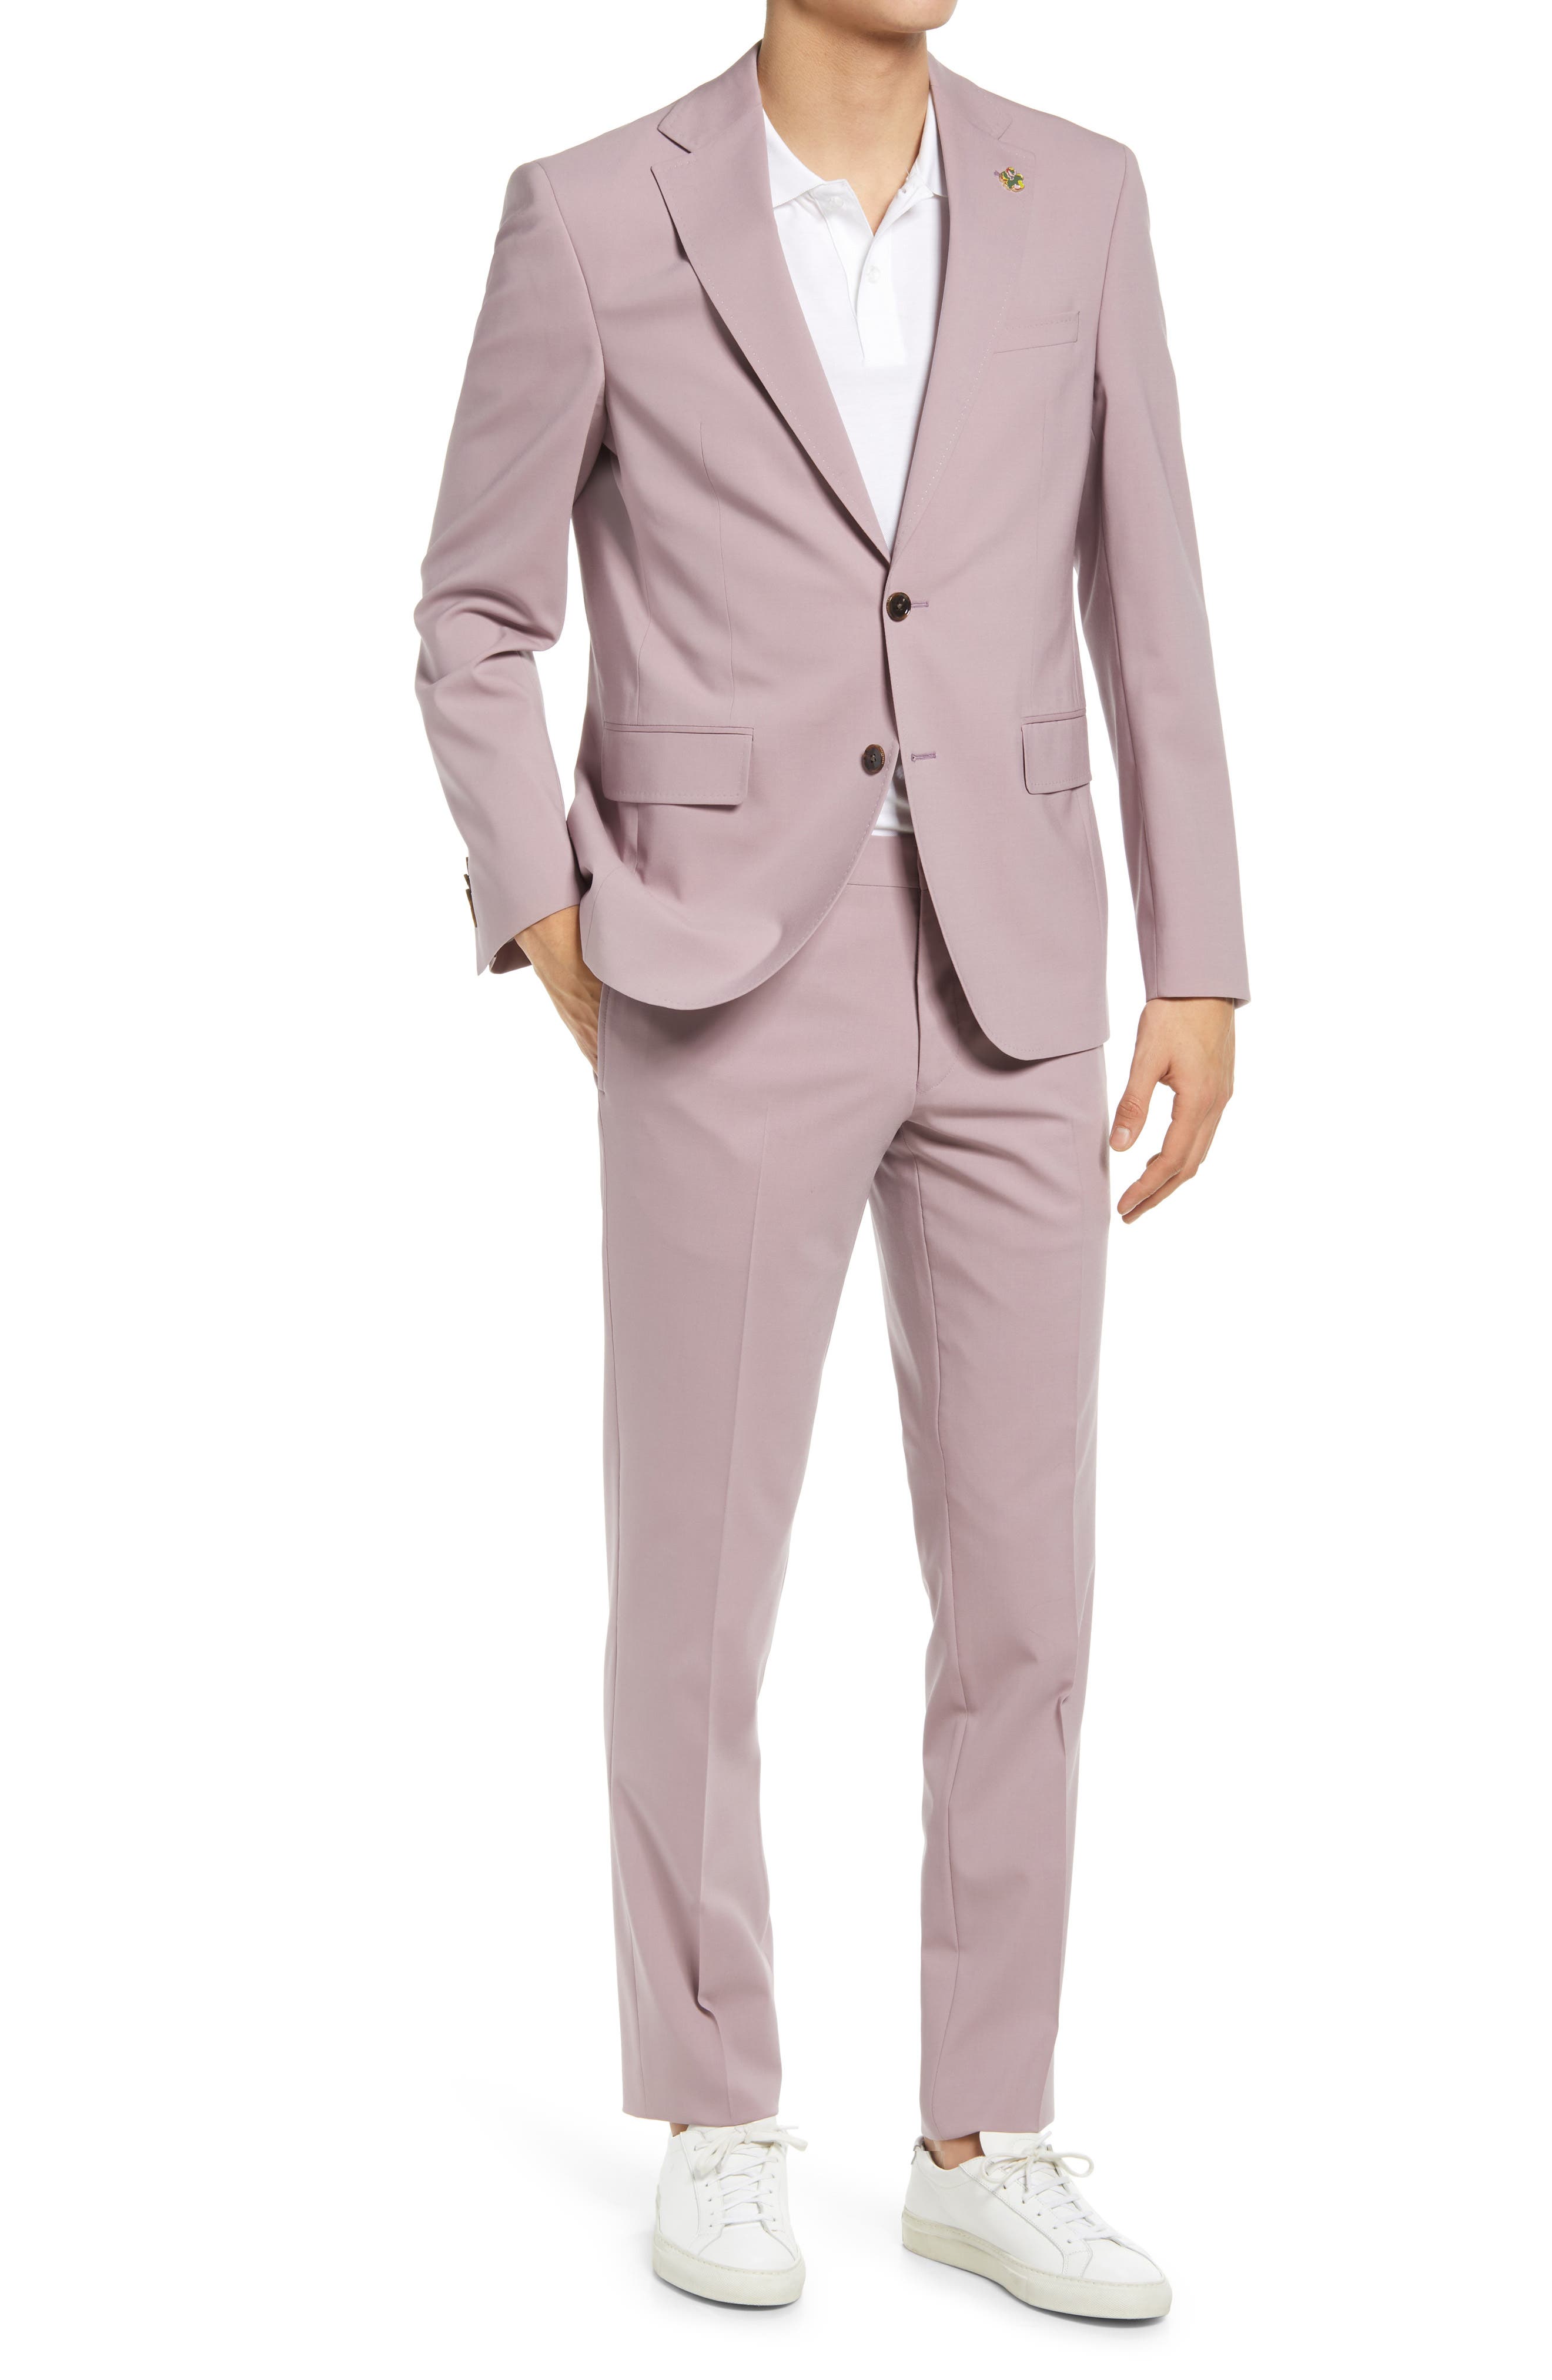 Roger Slim Fit Stretch Wool Suit ...